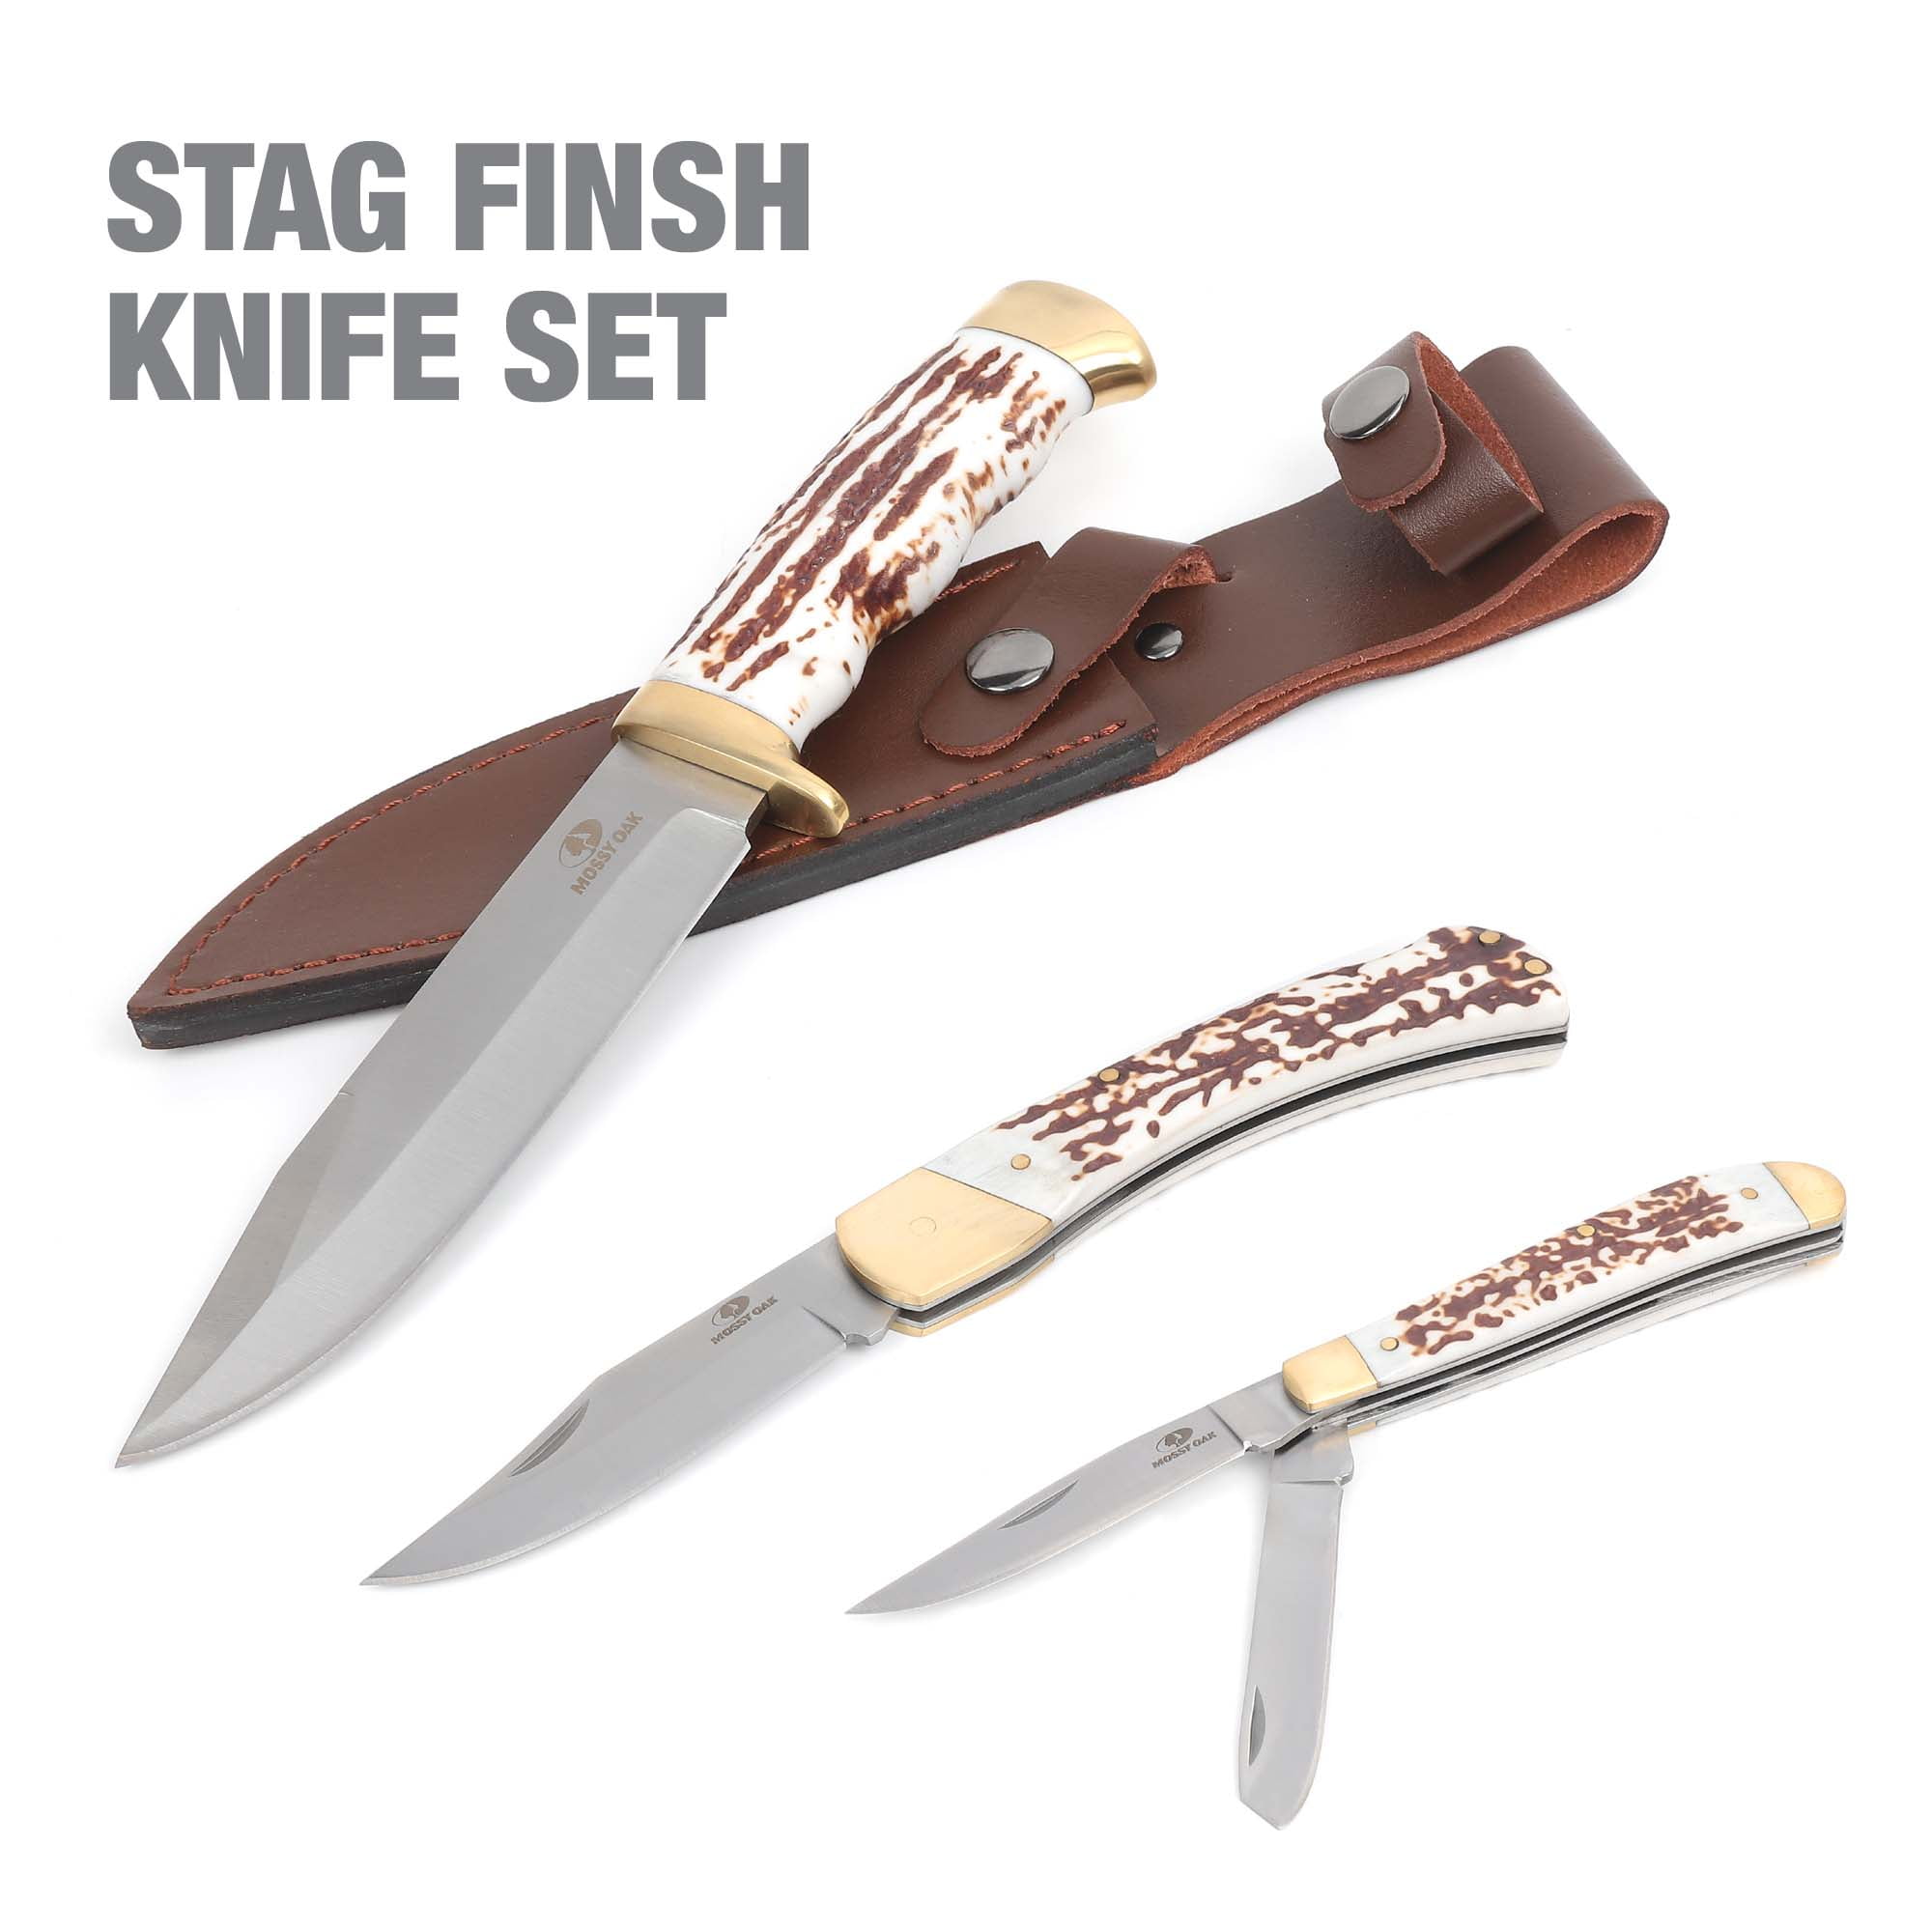 Mossy Oak 3-Piece Stag Finish Knife Set with Leather Sheath, Model 3903